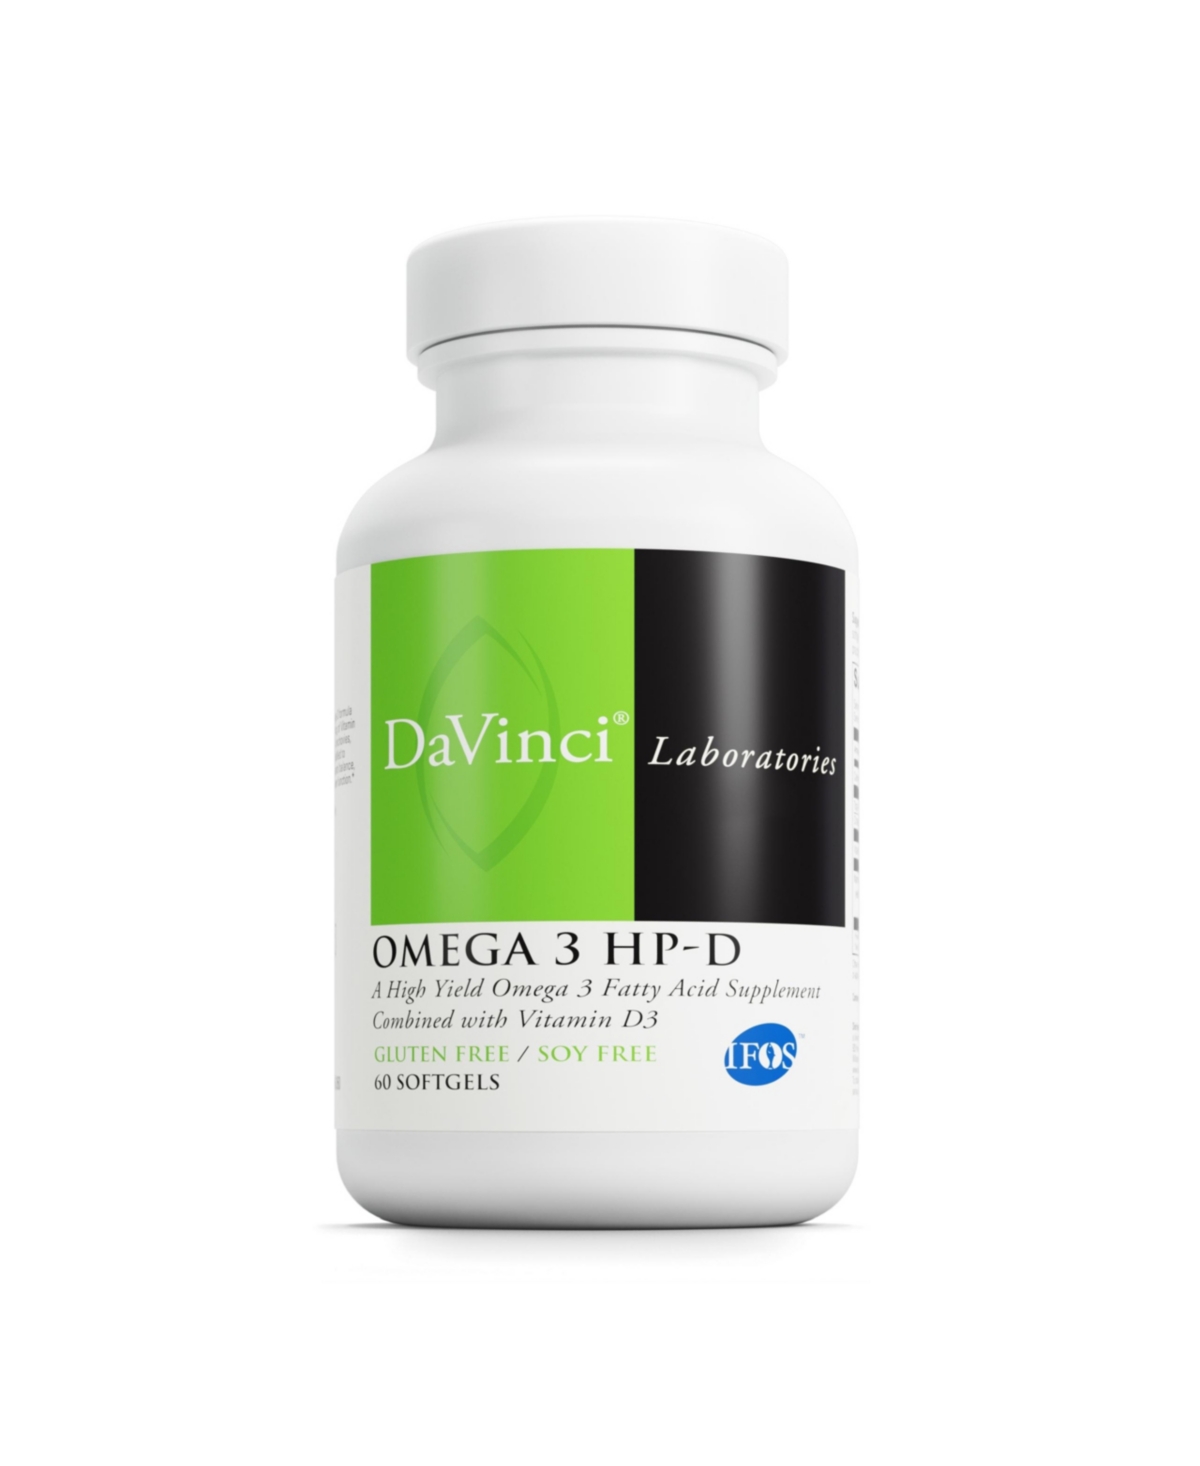 DaVinci Labs Omega 3 Hp-d - Dietary Supplement to Support Immune System, Healthy Joints and Cardiovascular and Skin Health - With Vitamin D3 and More